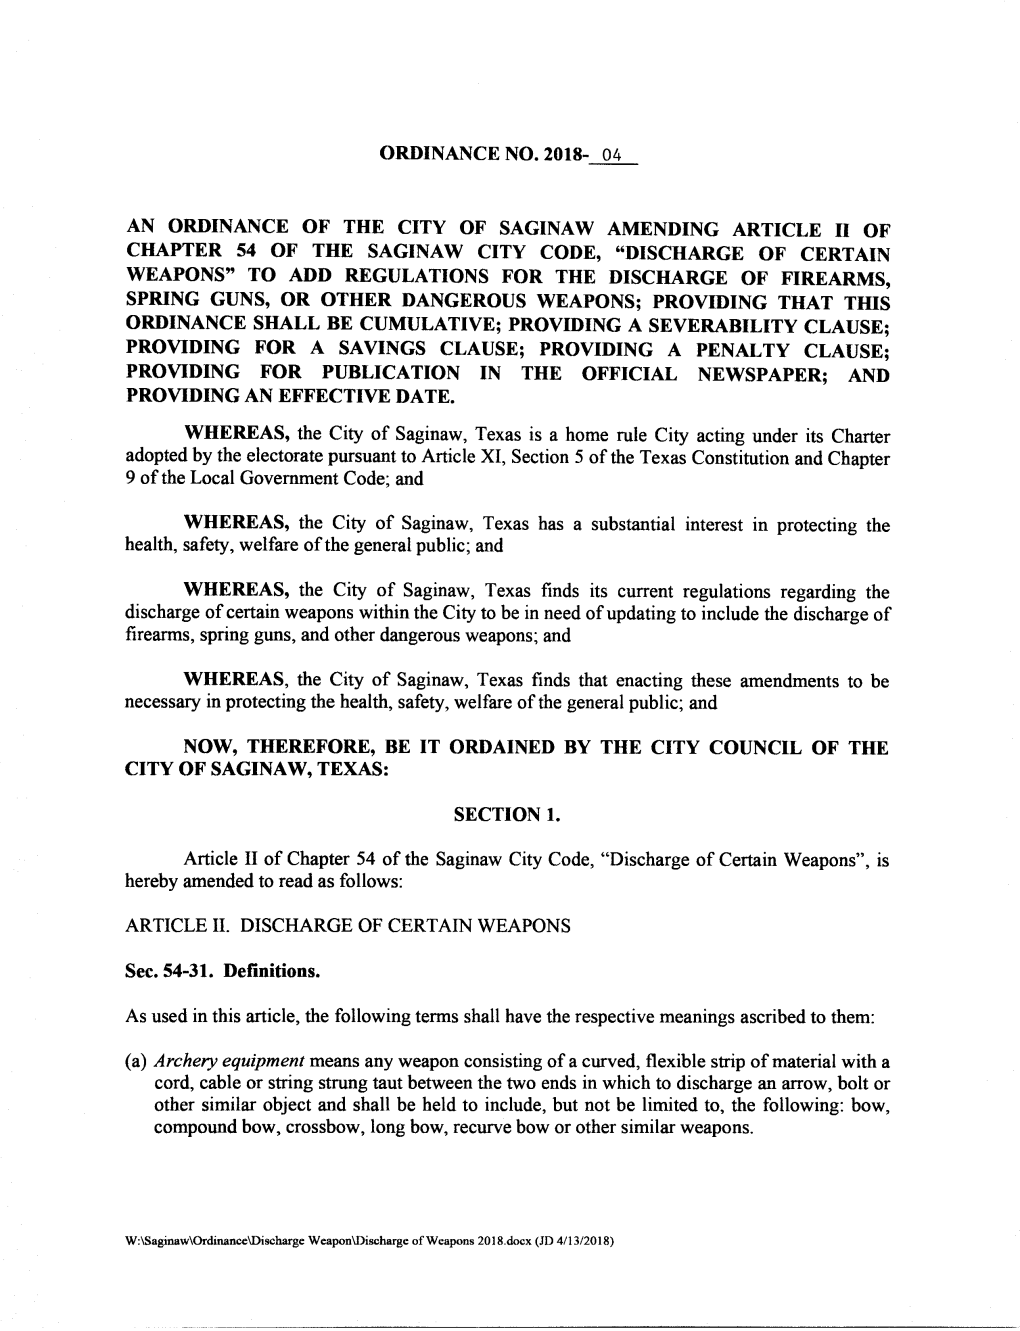 An Ordinance of the City of Saginaw Amending Article Ii Of